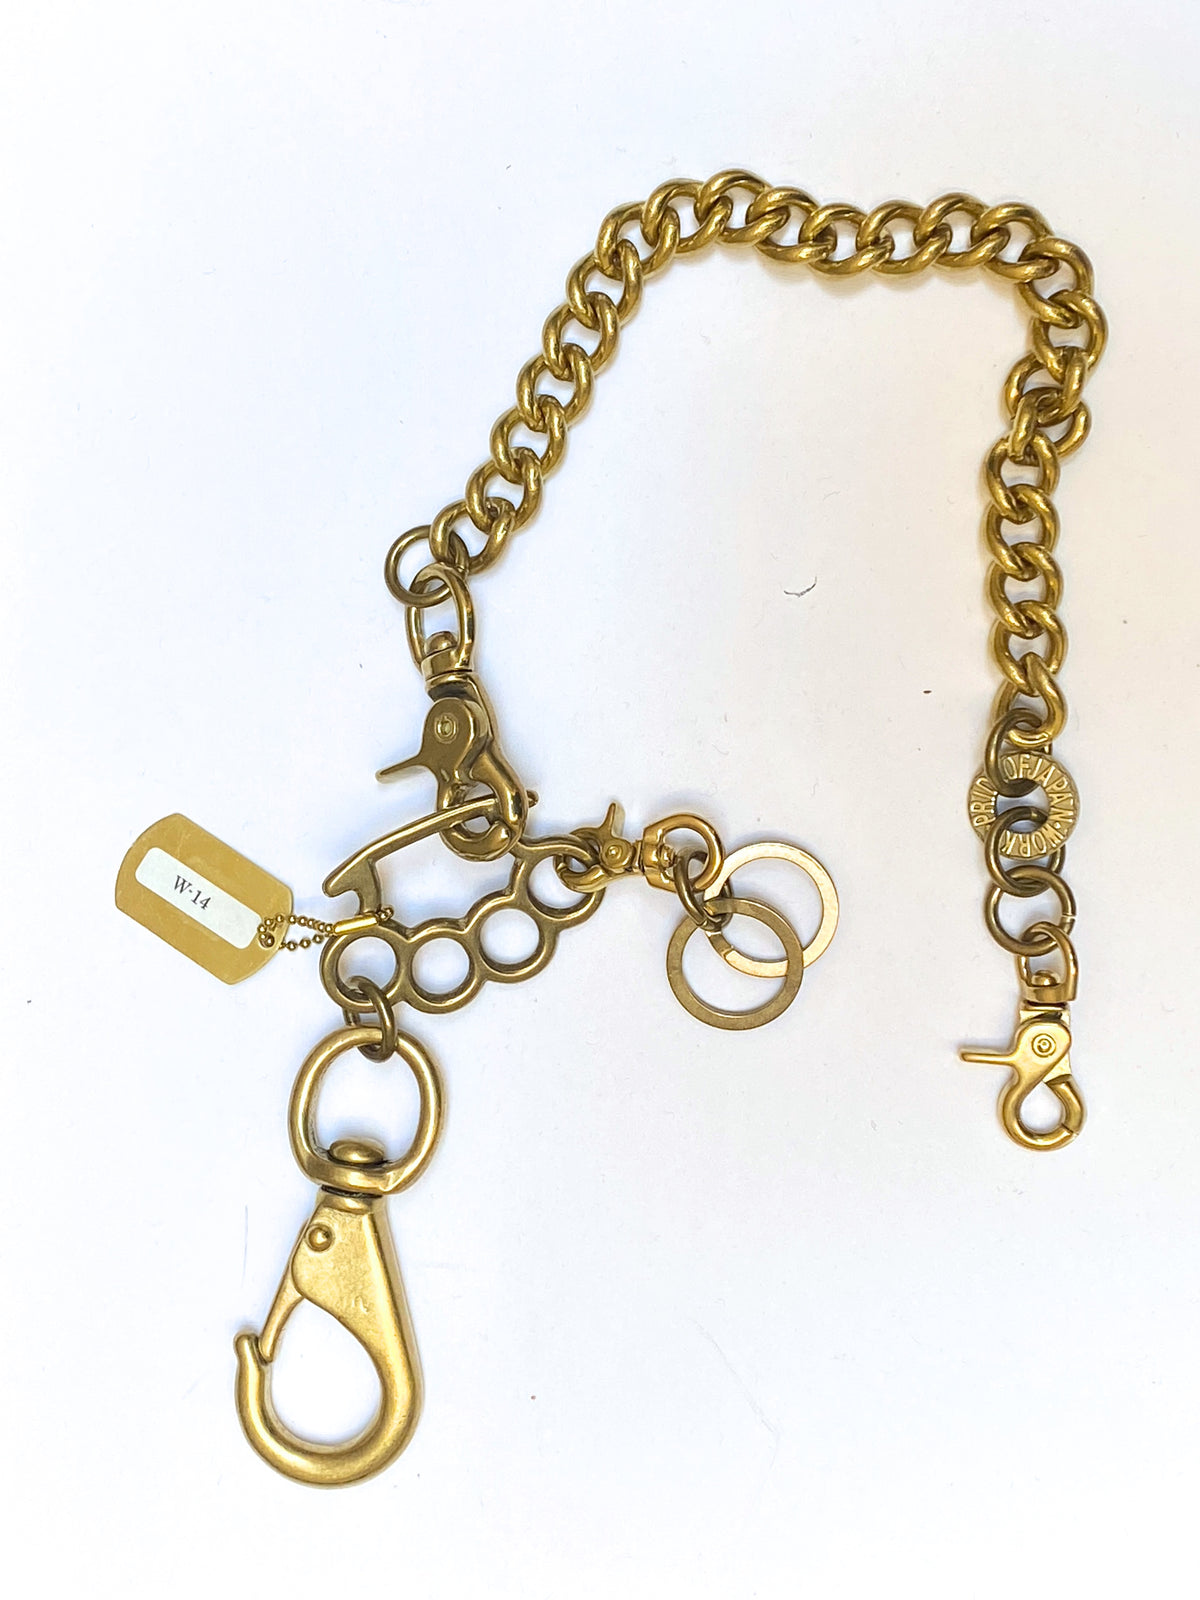 Iron Heart Brass-W14 Wallet Chain with Rings and Clip